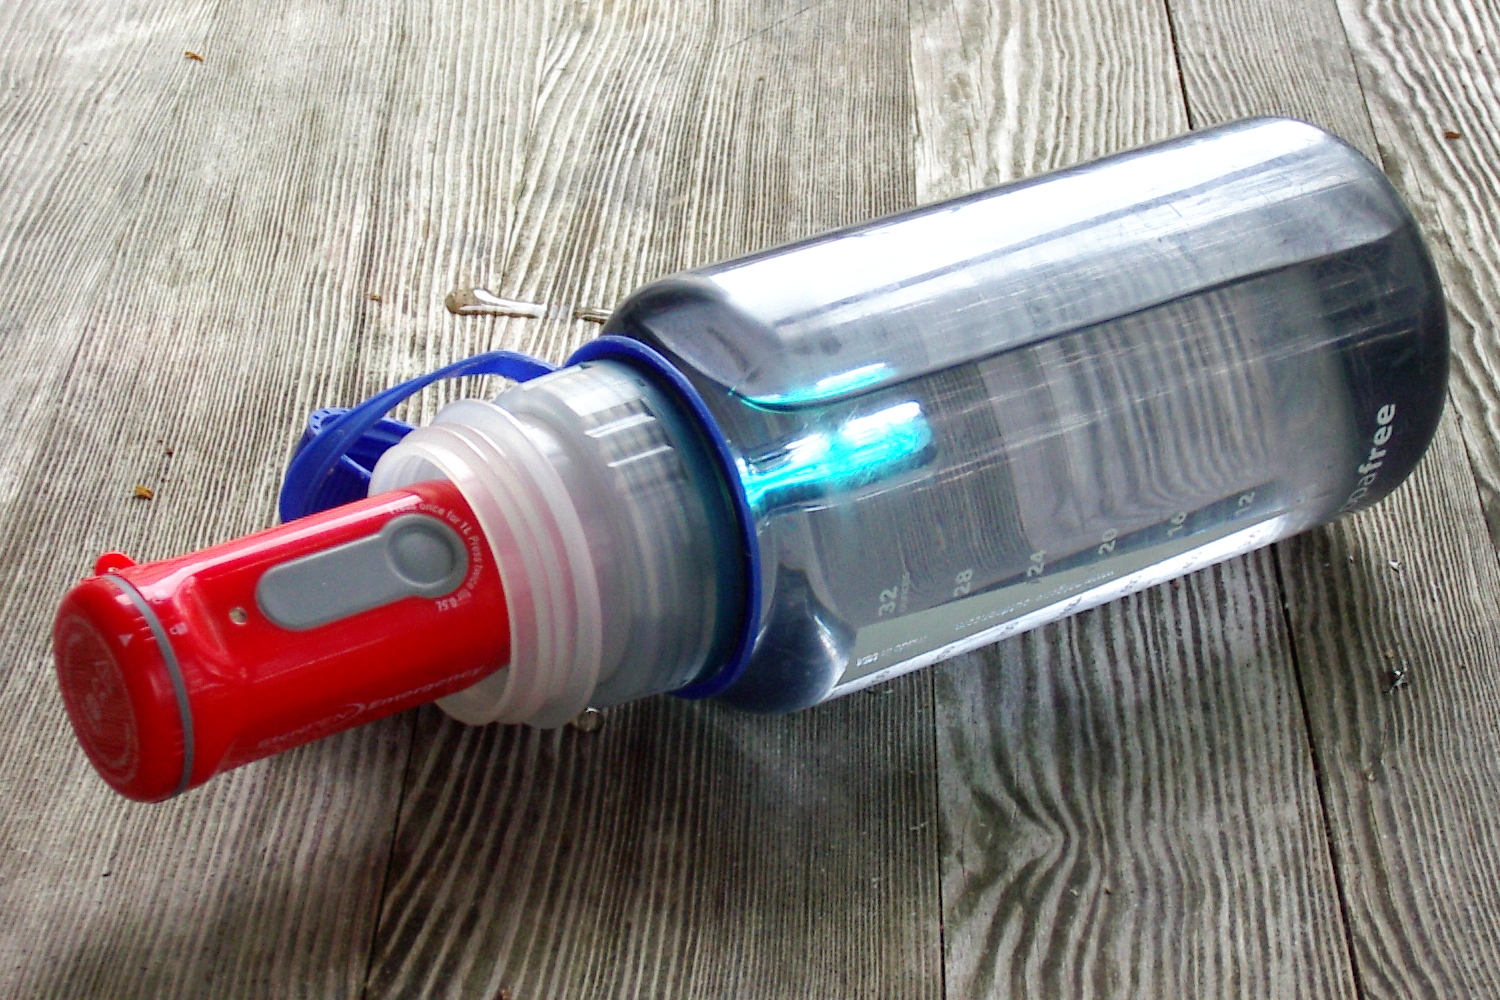 Portable Water Purifier